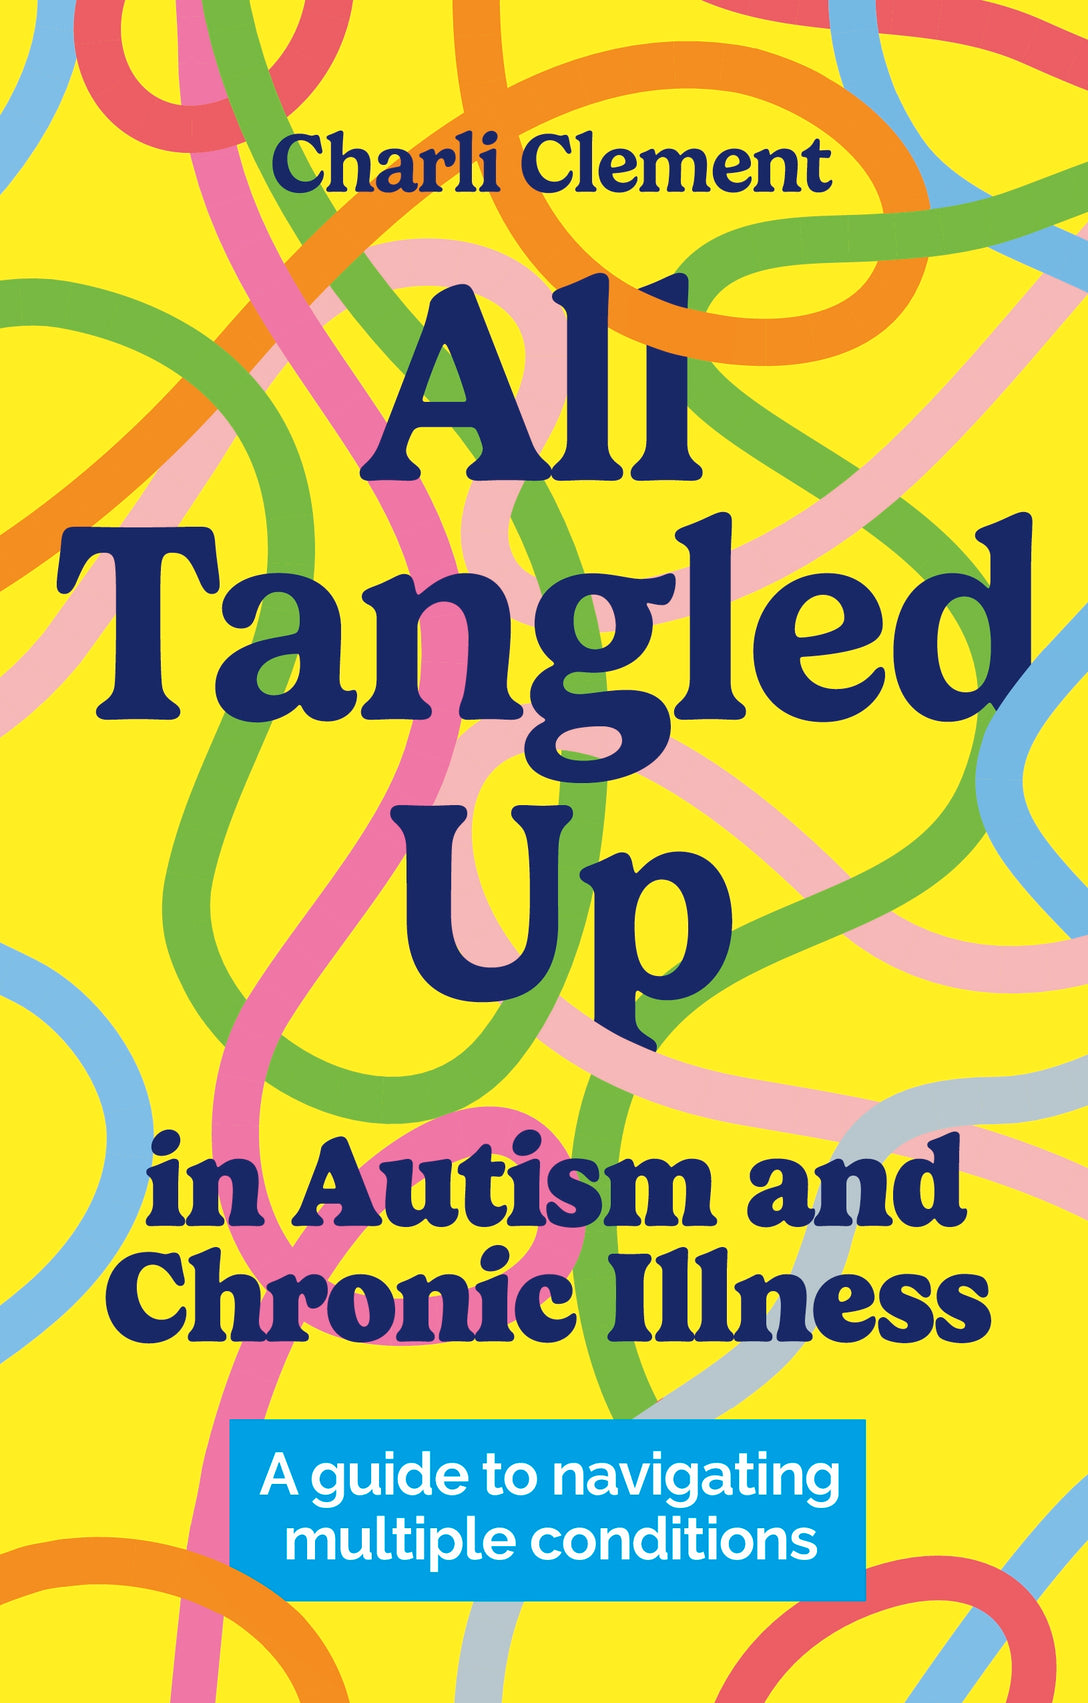 All Tangled Up in Autism and Chronic Illness by Charli Clement